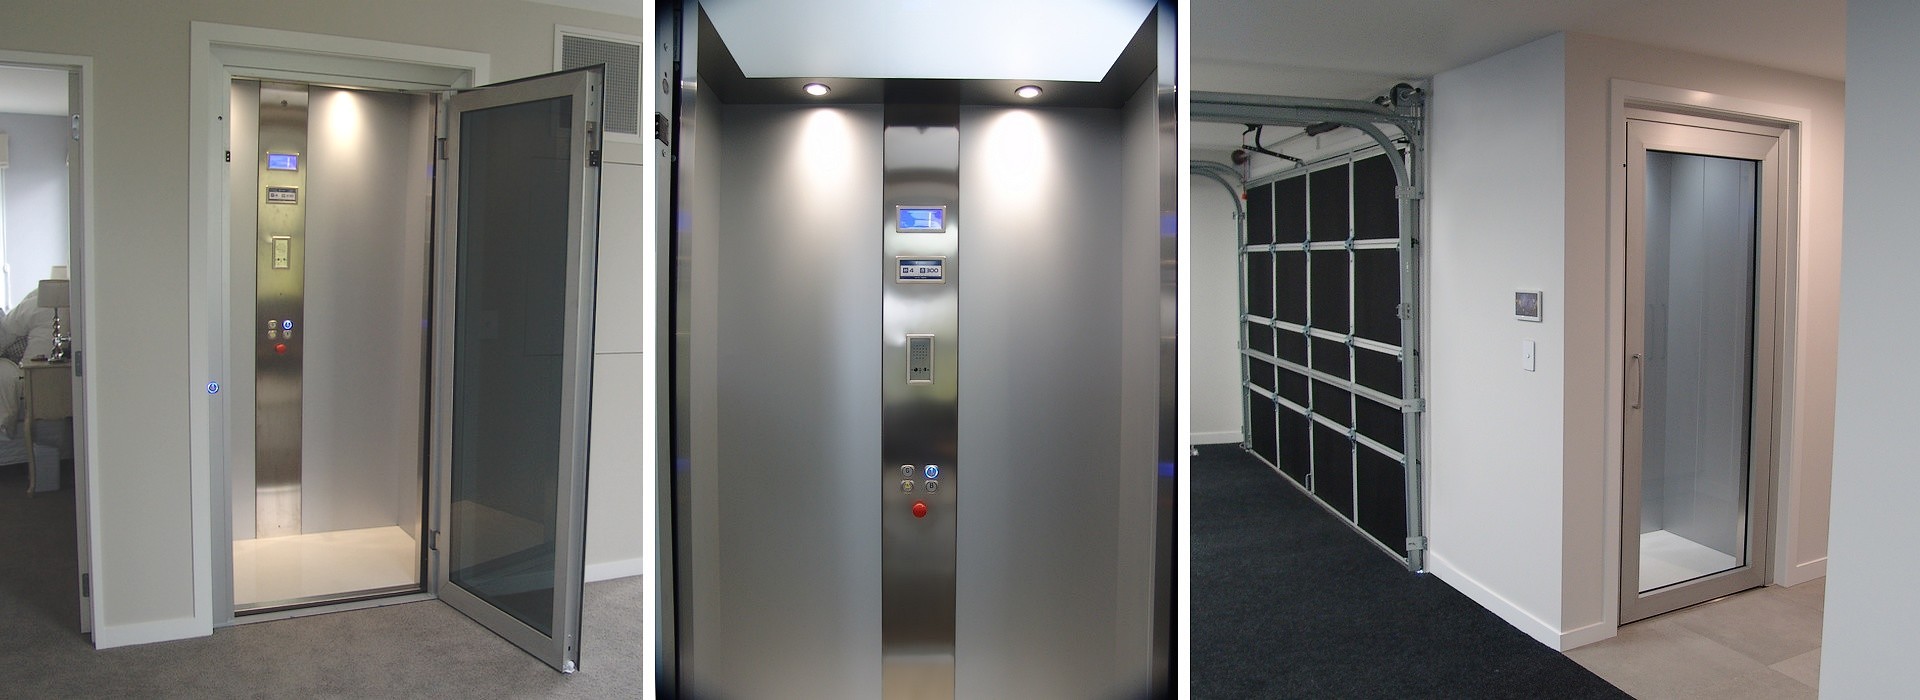 LiftingItalia’s InDomo lite elevators for residential homes and disability access in commercial buildings are available in New Zealand from McGrath Industries